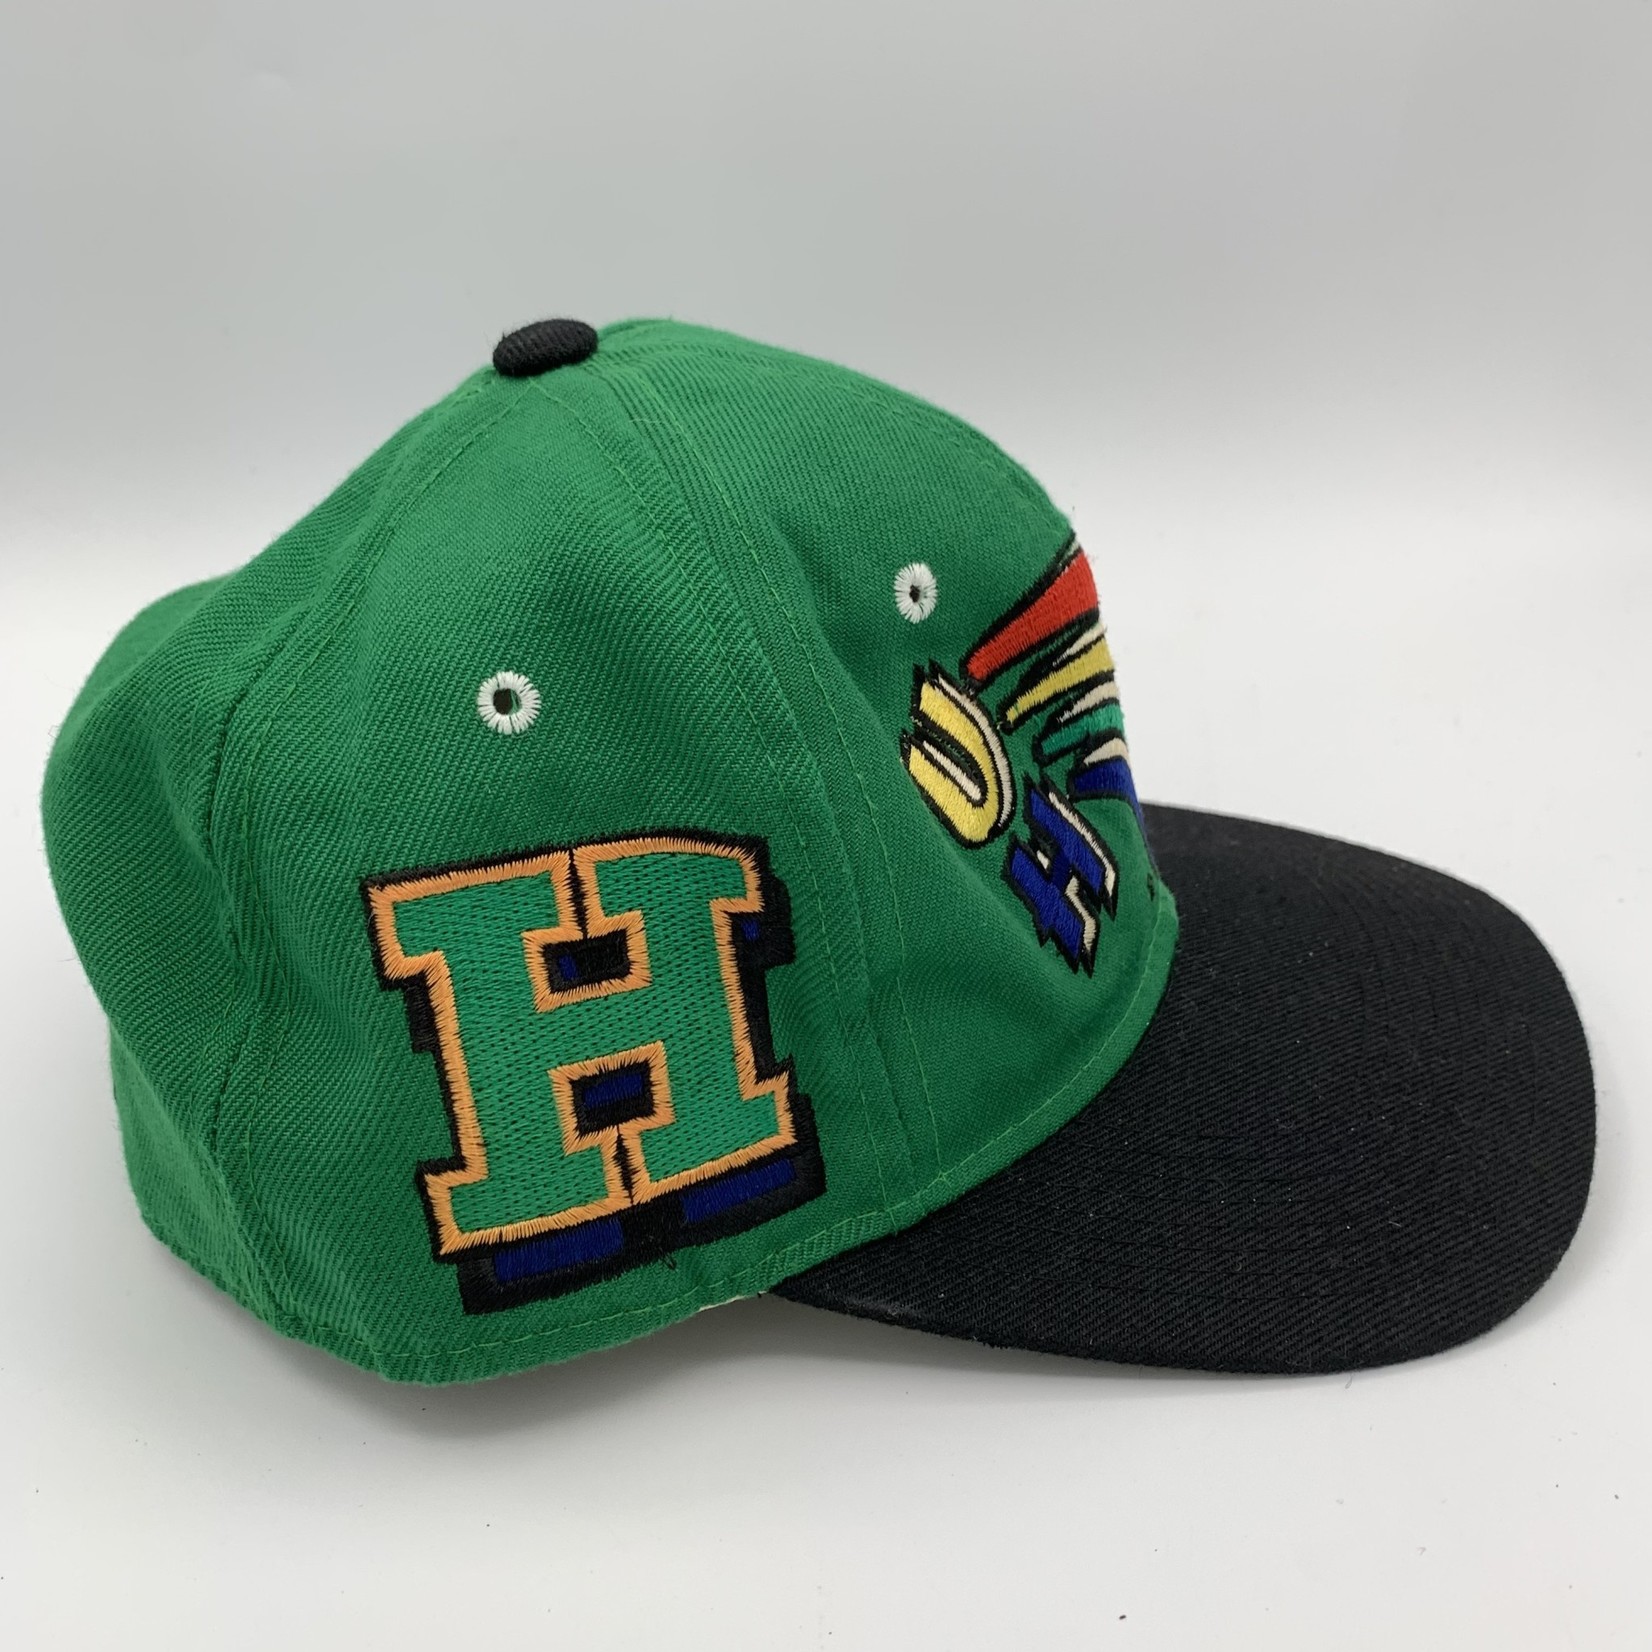 Mission Zero Vintage Collectors University of Hawaii Fitted Sz.7